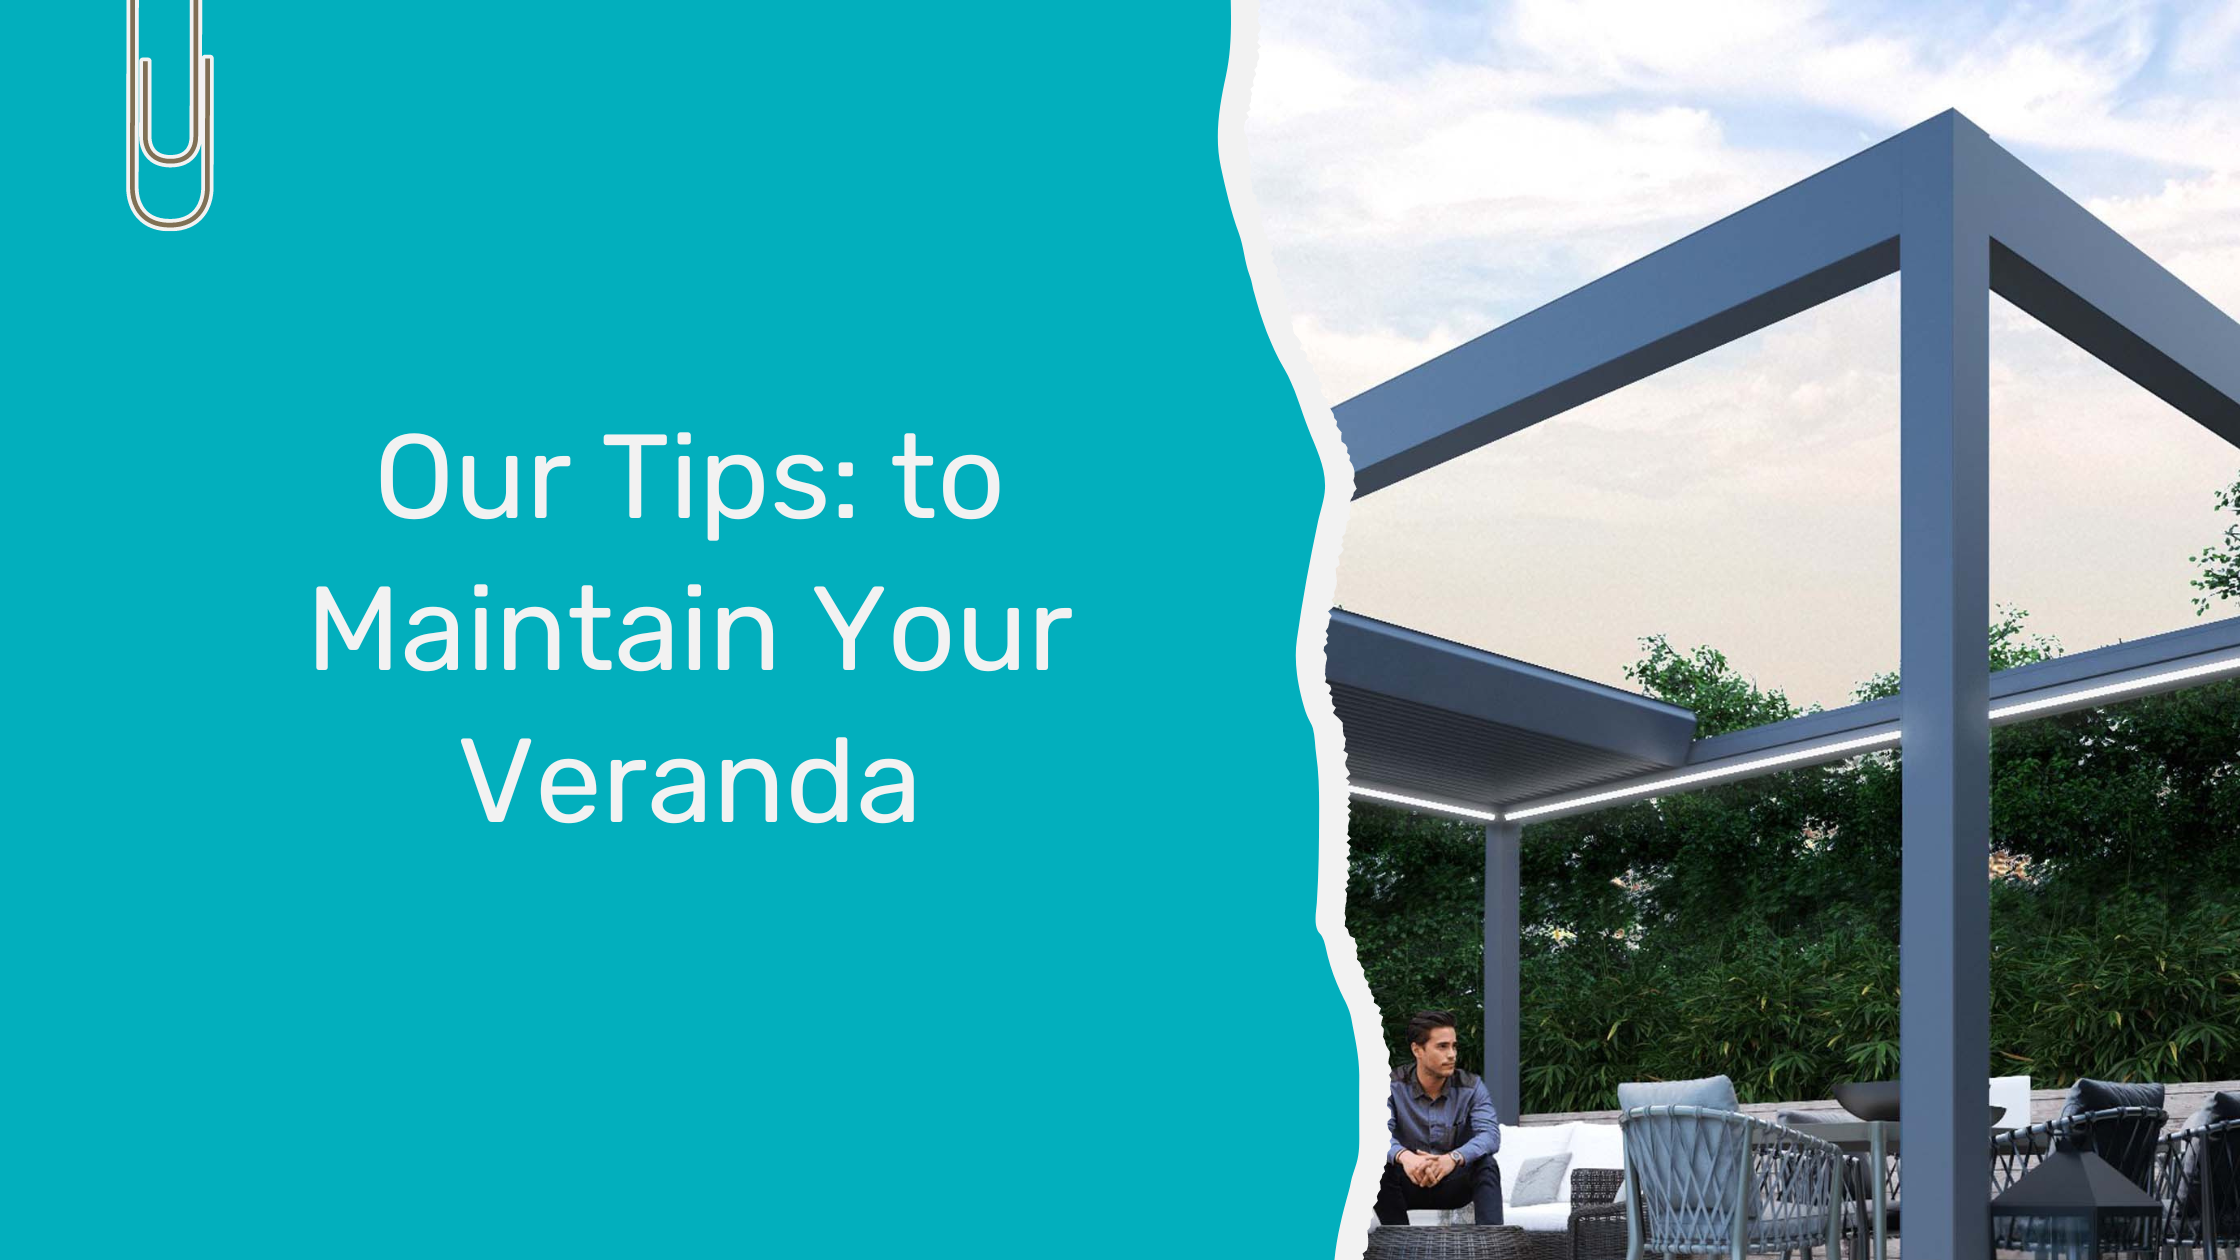 Our Tips: How to Maintain your Veranda